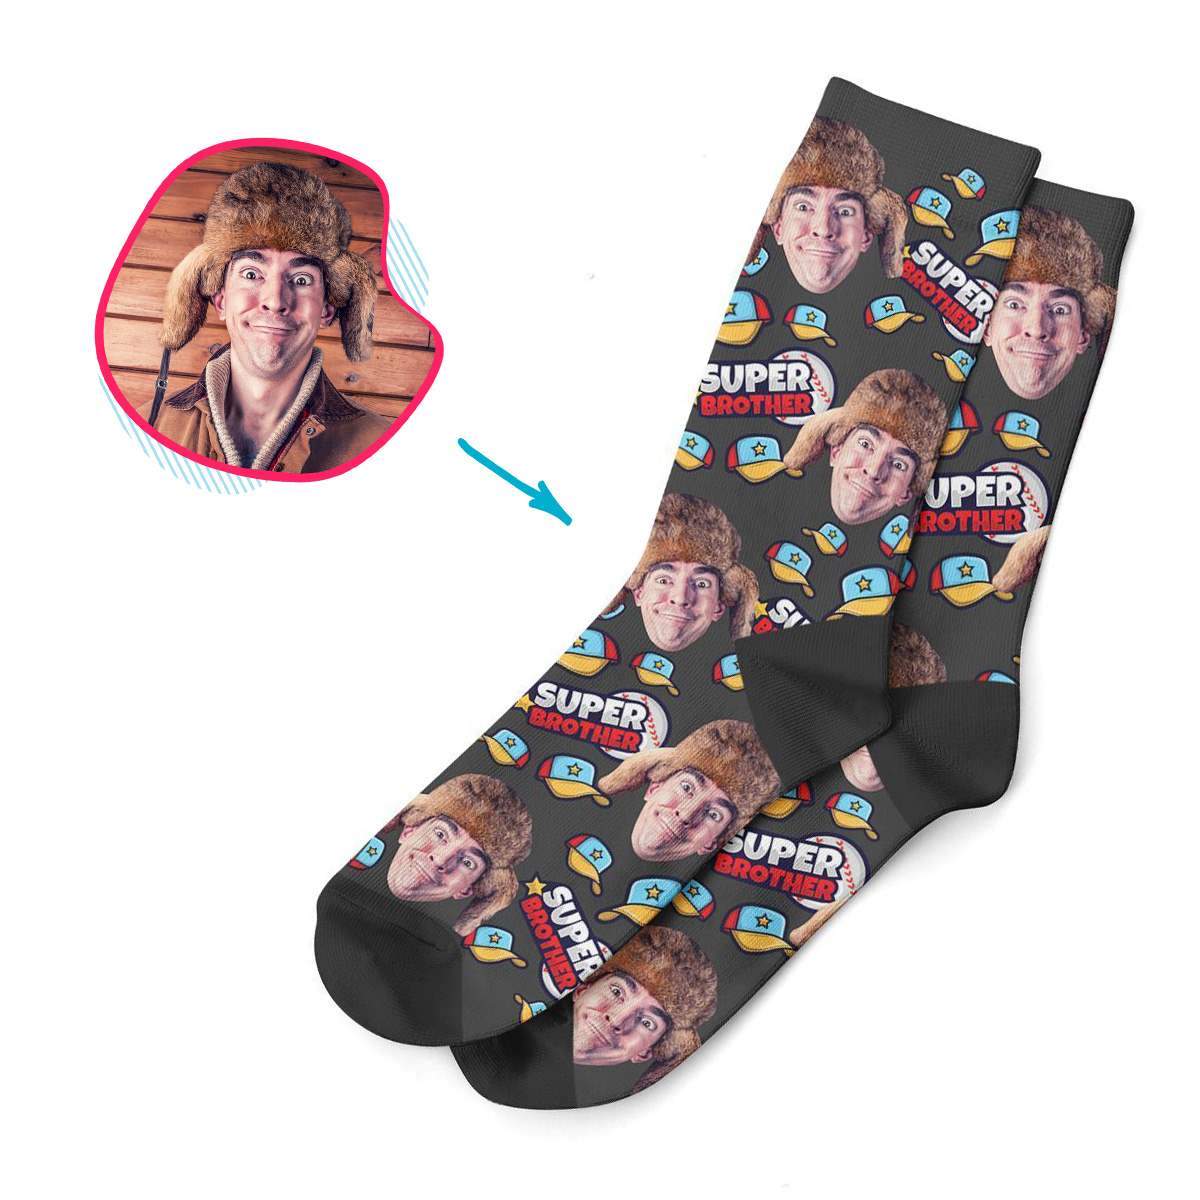 dark Super Brother socks personalized with photo of face printed on them